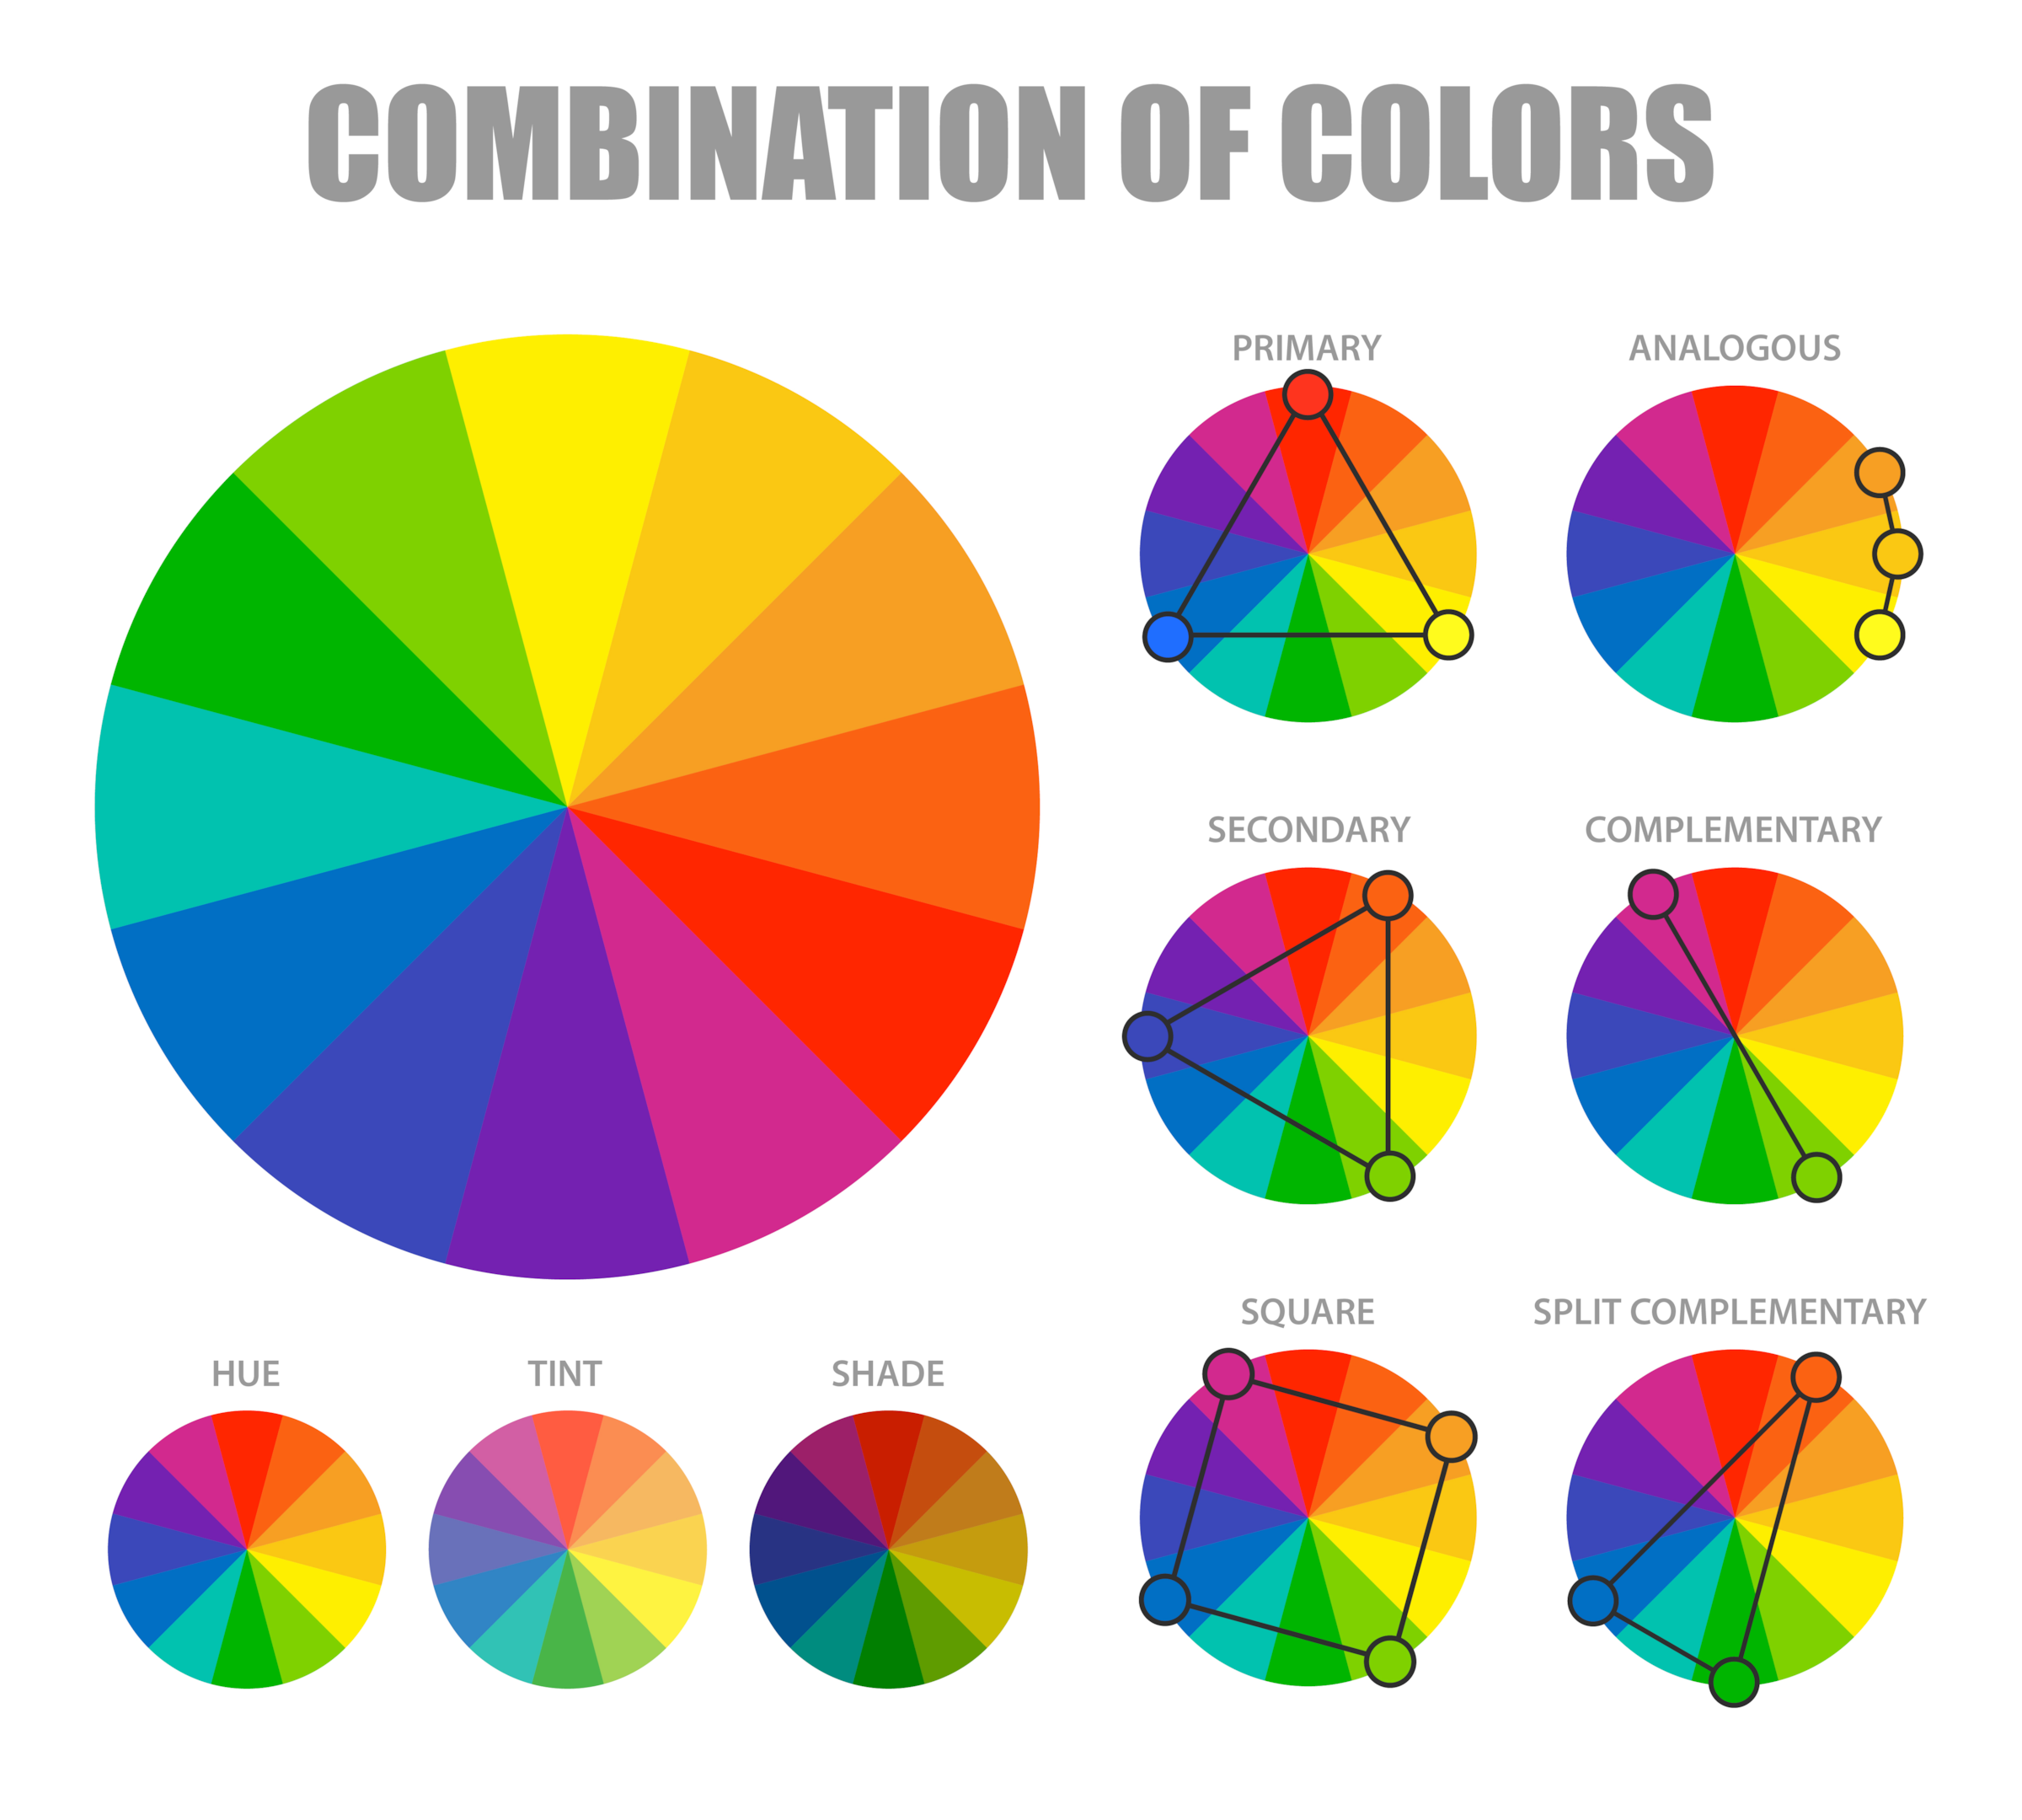 The color wheel and its combinations of colors